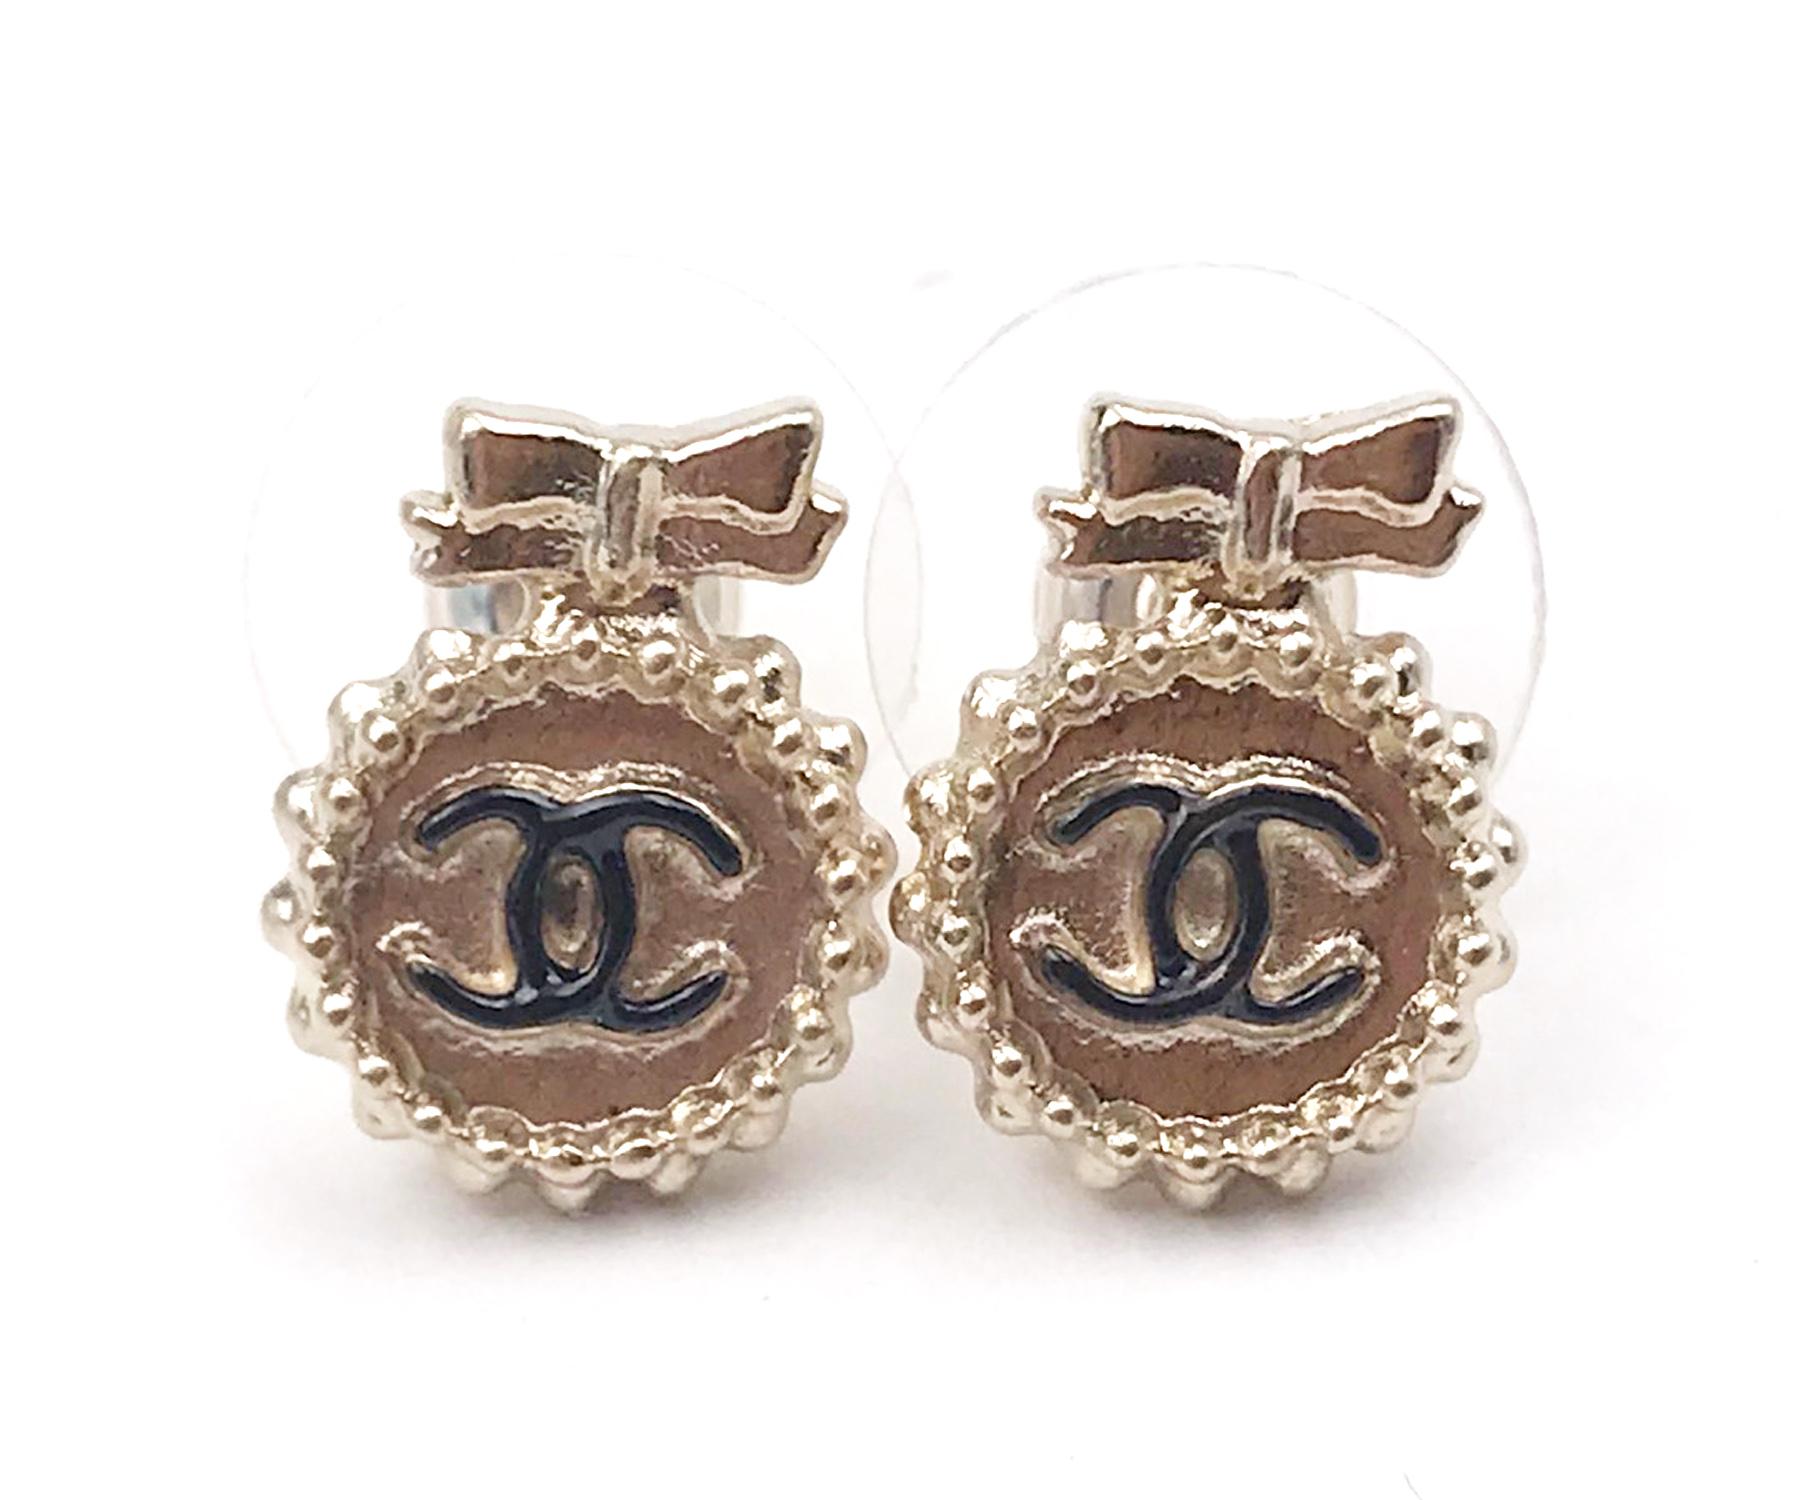 Chanel Classic Gold Bow CC Round Small Button Stud Piercing Earrings

* Marked 14
* Made in Italy

-It is approximately 0.55